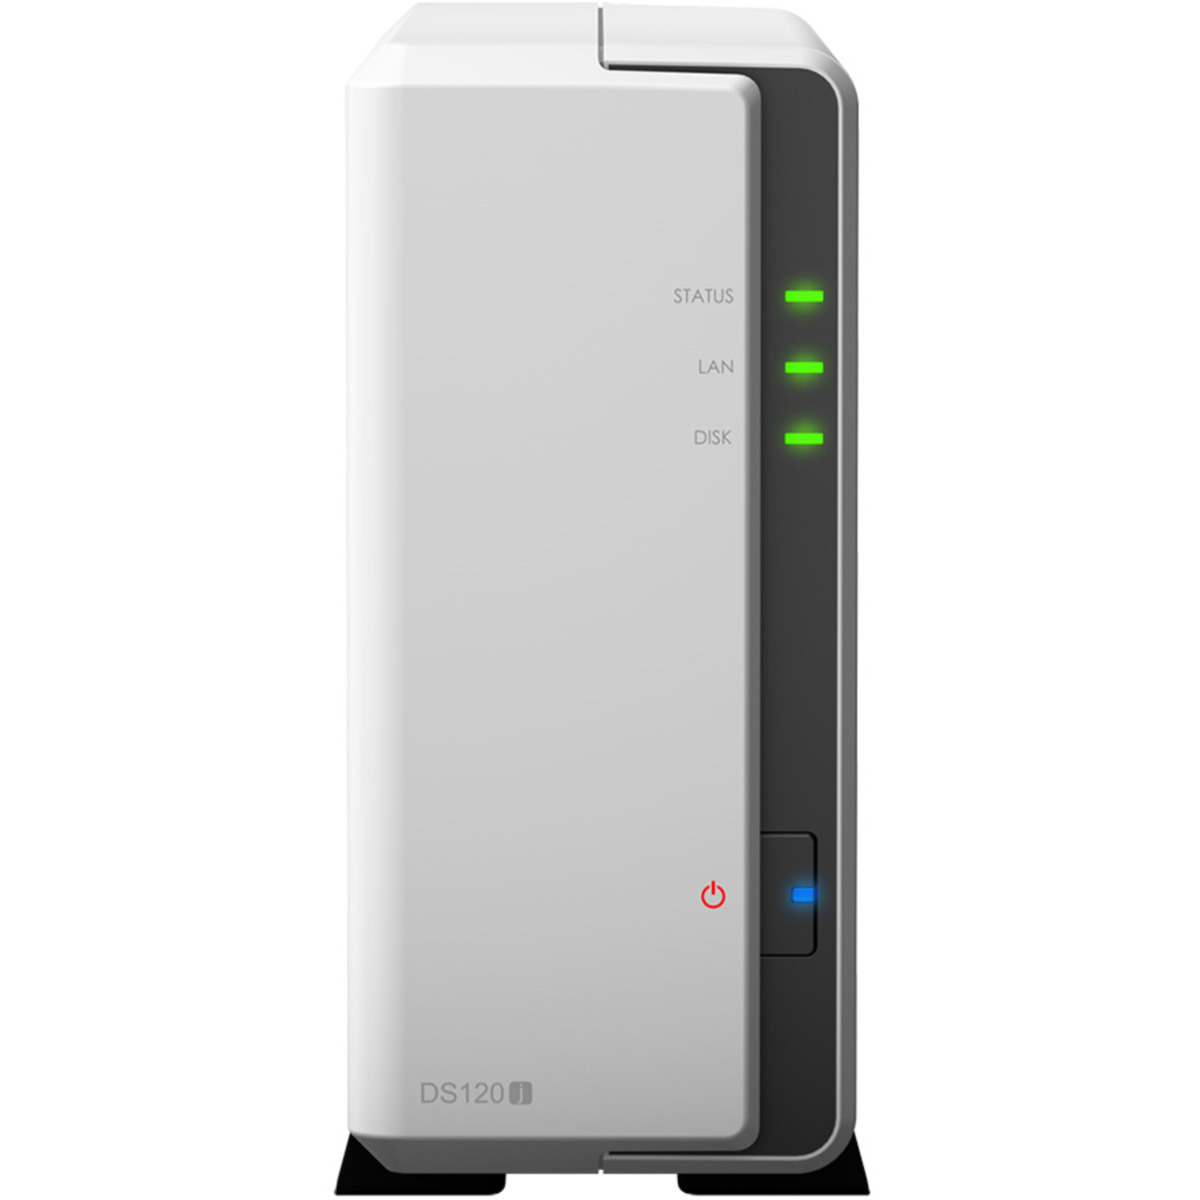 buy $471 Synology DiskStation DS120j 16tb Desktop NAS - Network Attached Storage Device 1x16000gb Toshiba Enterprise Capacity MG08ACA16TE 3.5 7200rpm SATA 6Gb/s HDD ENTERPRISE Class Drives Installed - Burn-In Tested - nas headquarters buy network attached storage server device das new raid-5 free shipping usa DiskStation DS120j